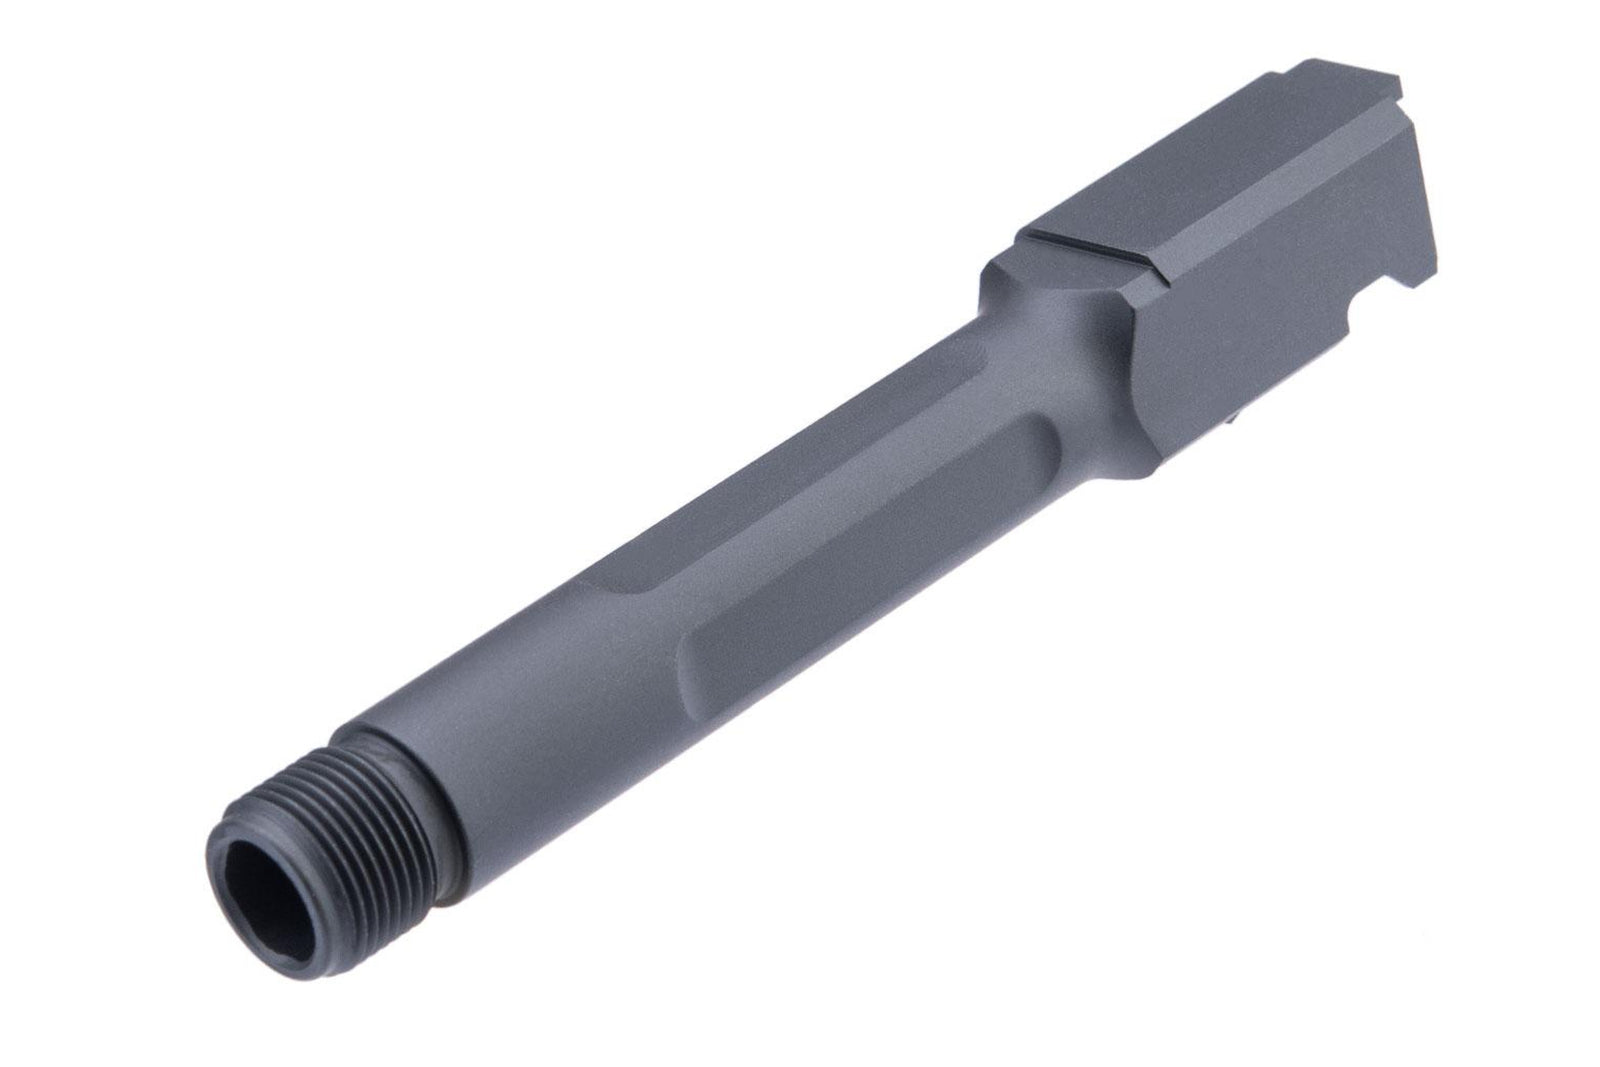 Pro-Arms CNC Aluminum Threaded Outer Barrel for Elite Force GLOCK 19 GBB Pistols